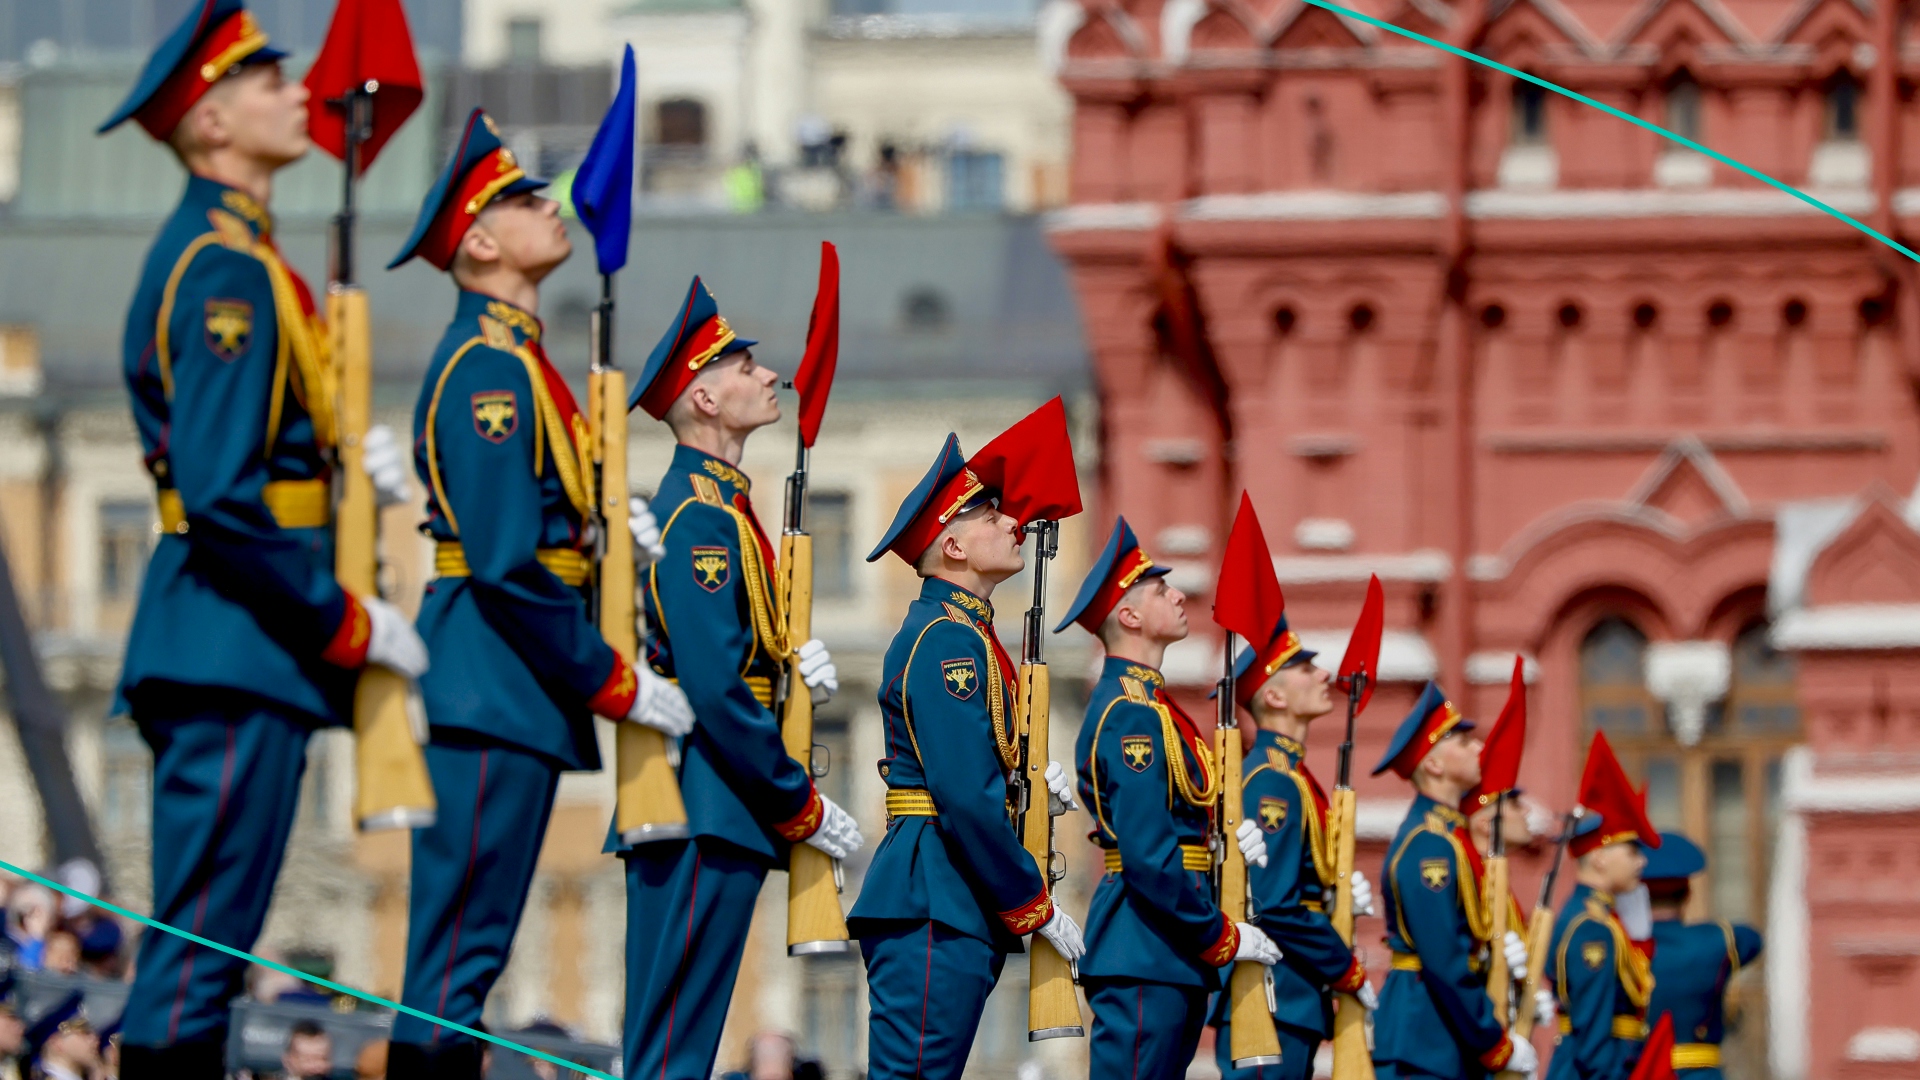 Russian soldiers walk to Red Square by passing through Tverskaya street during the rehearsal of Victory Day military parade marking the 77th anniversary of the victory over Nazi Germany in World War II, at Red Square in Moscow, Russia on May 07, 2022